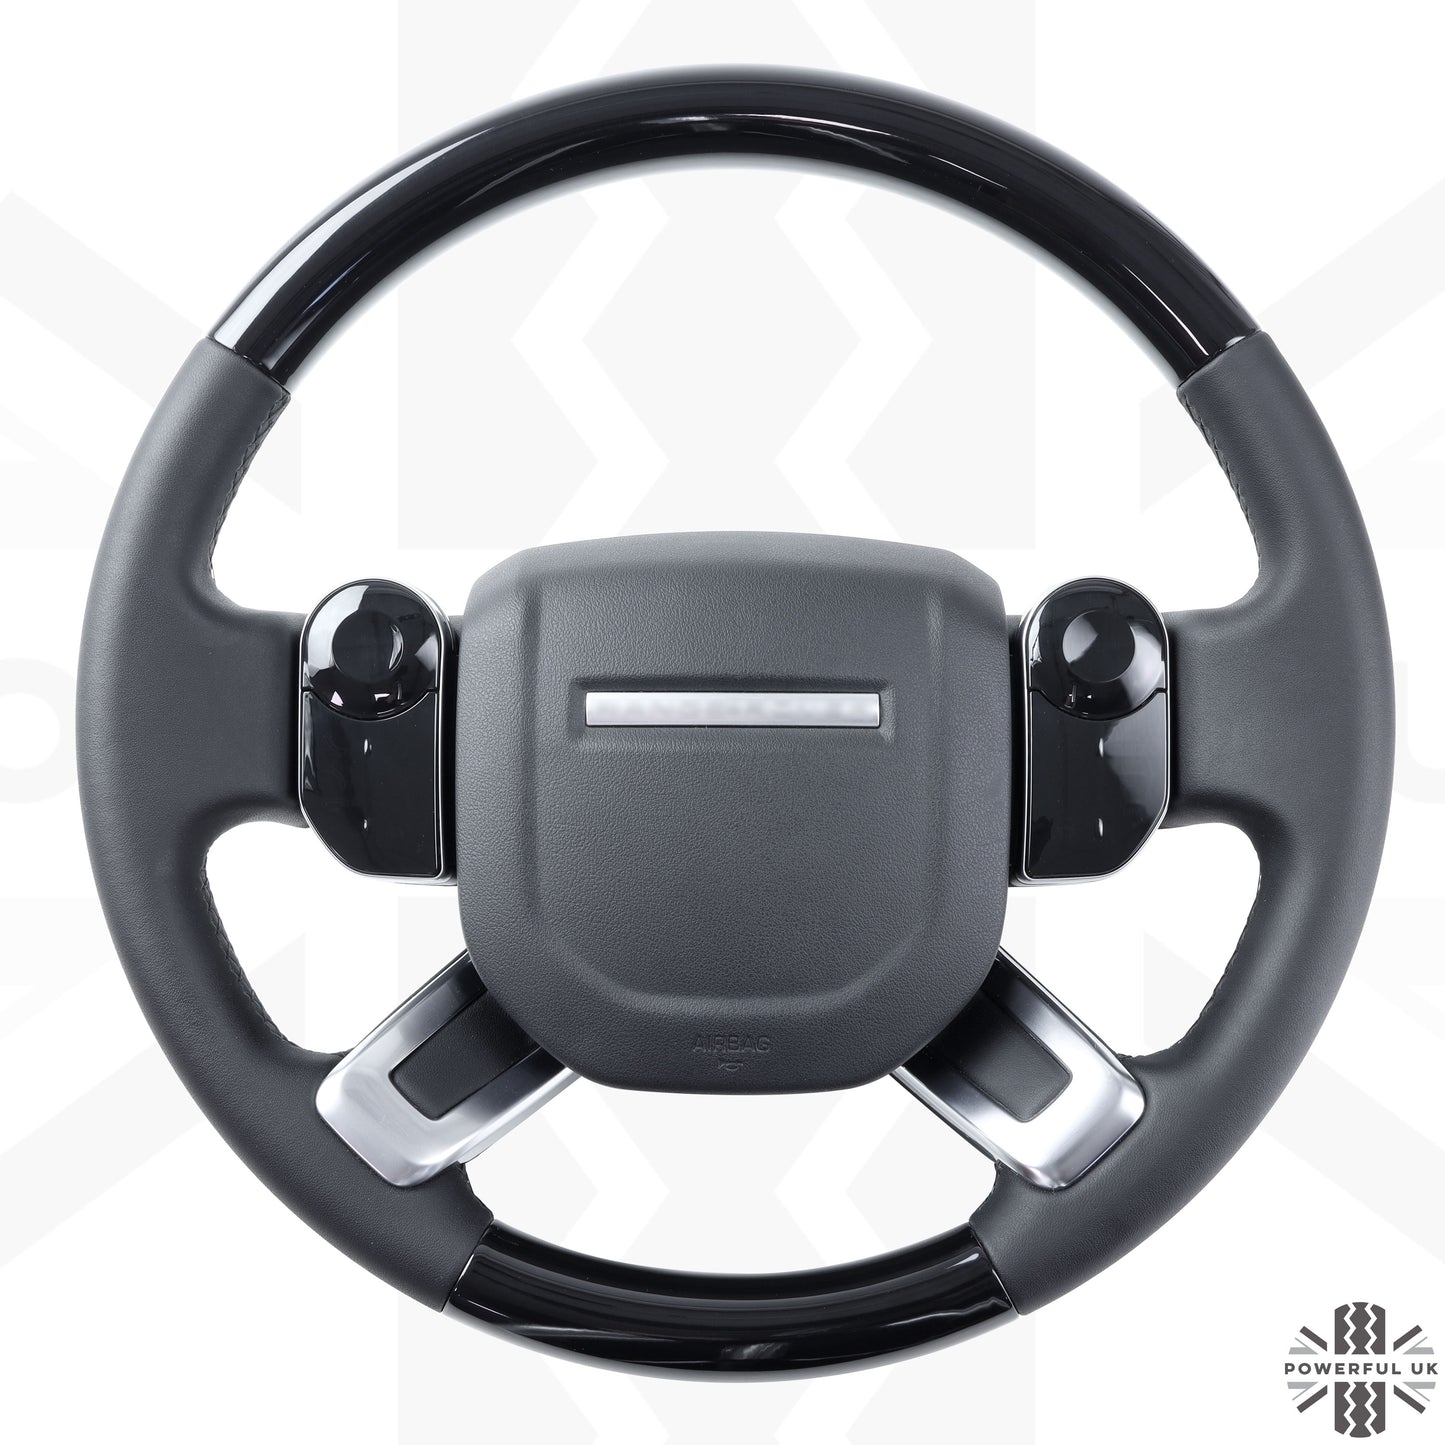 Steering Wheel - NON Heated - Black Piano - Microfiber Leather for Land Rover Discovery 5